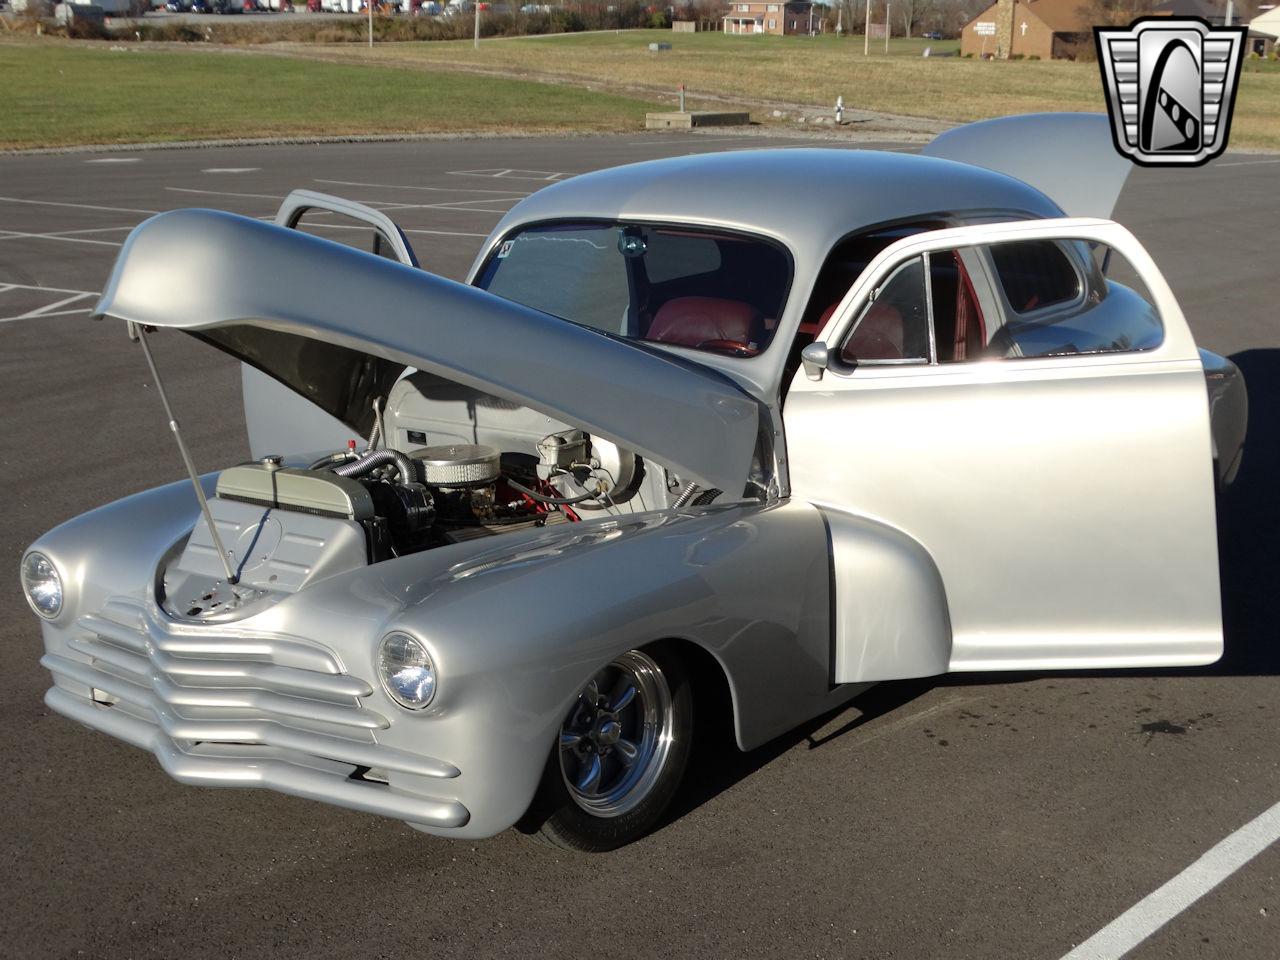 1947 Chevrolet Coupe